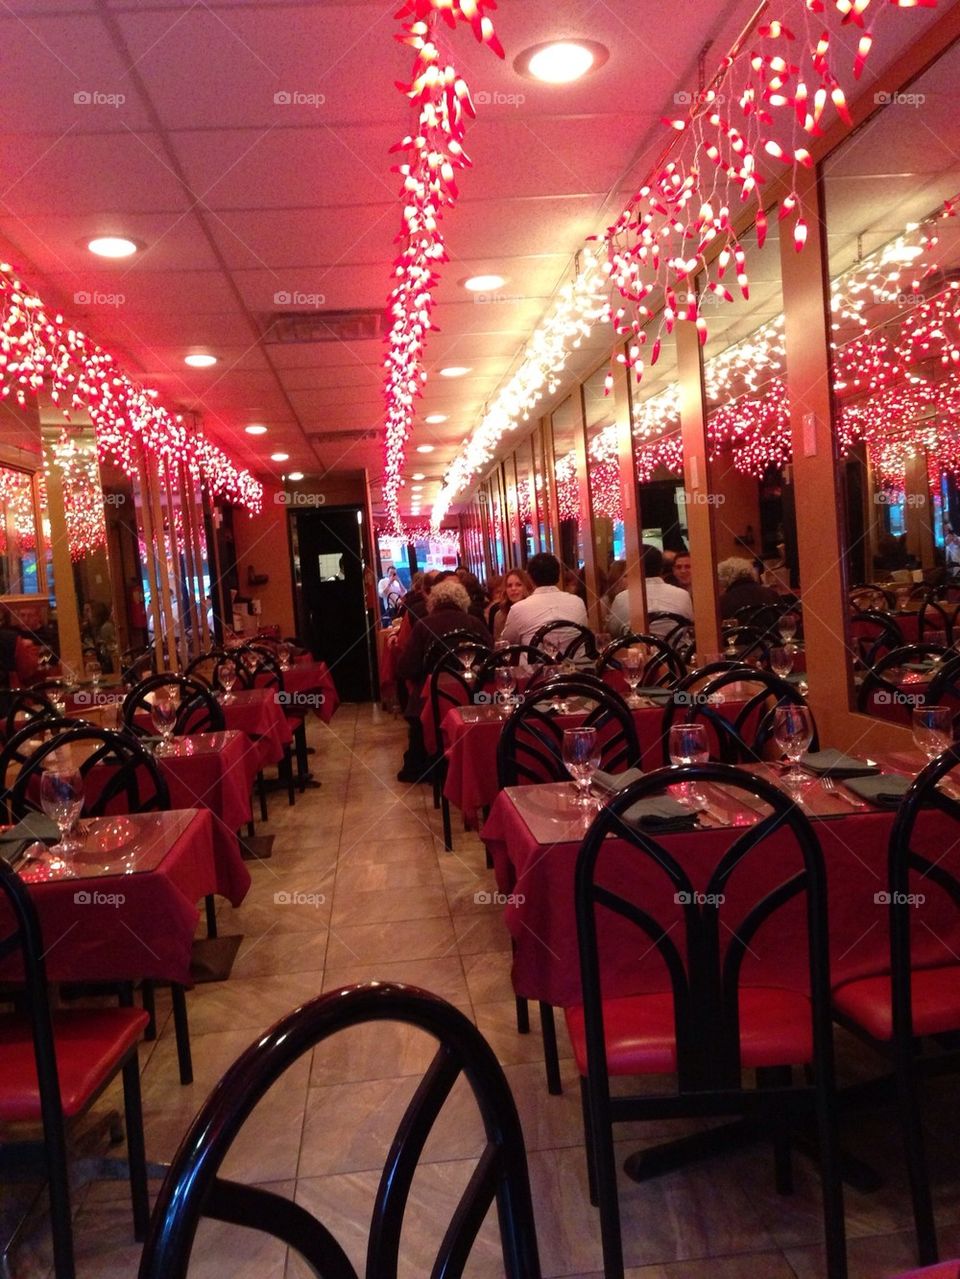 new york united states indian restaurant sonar gaow by kcovillo